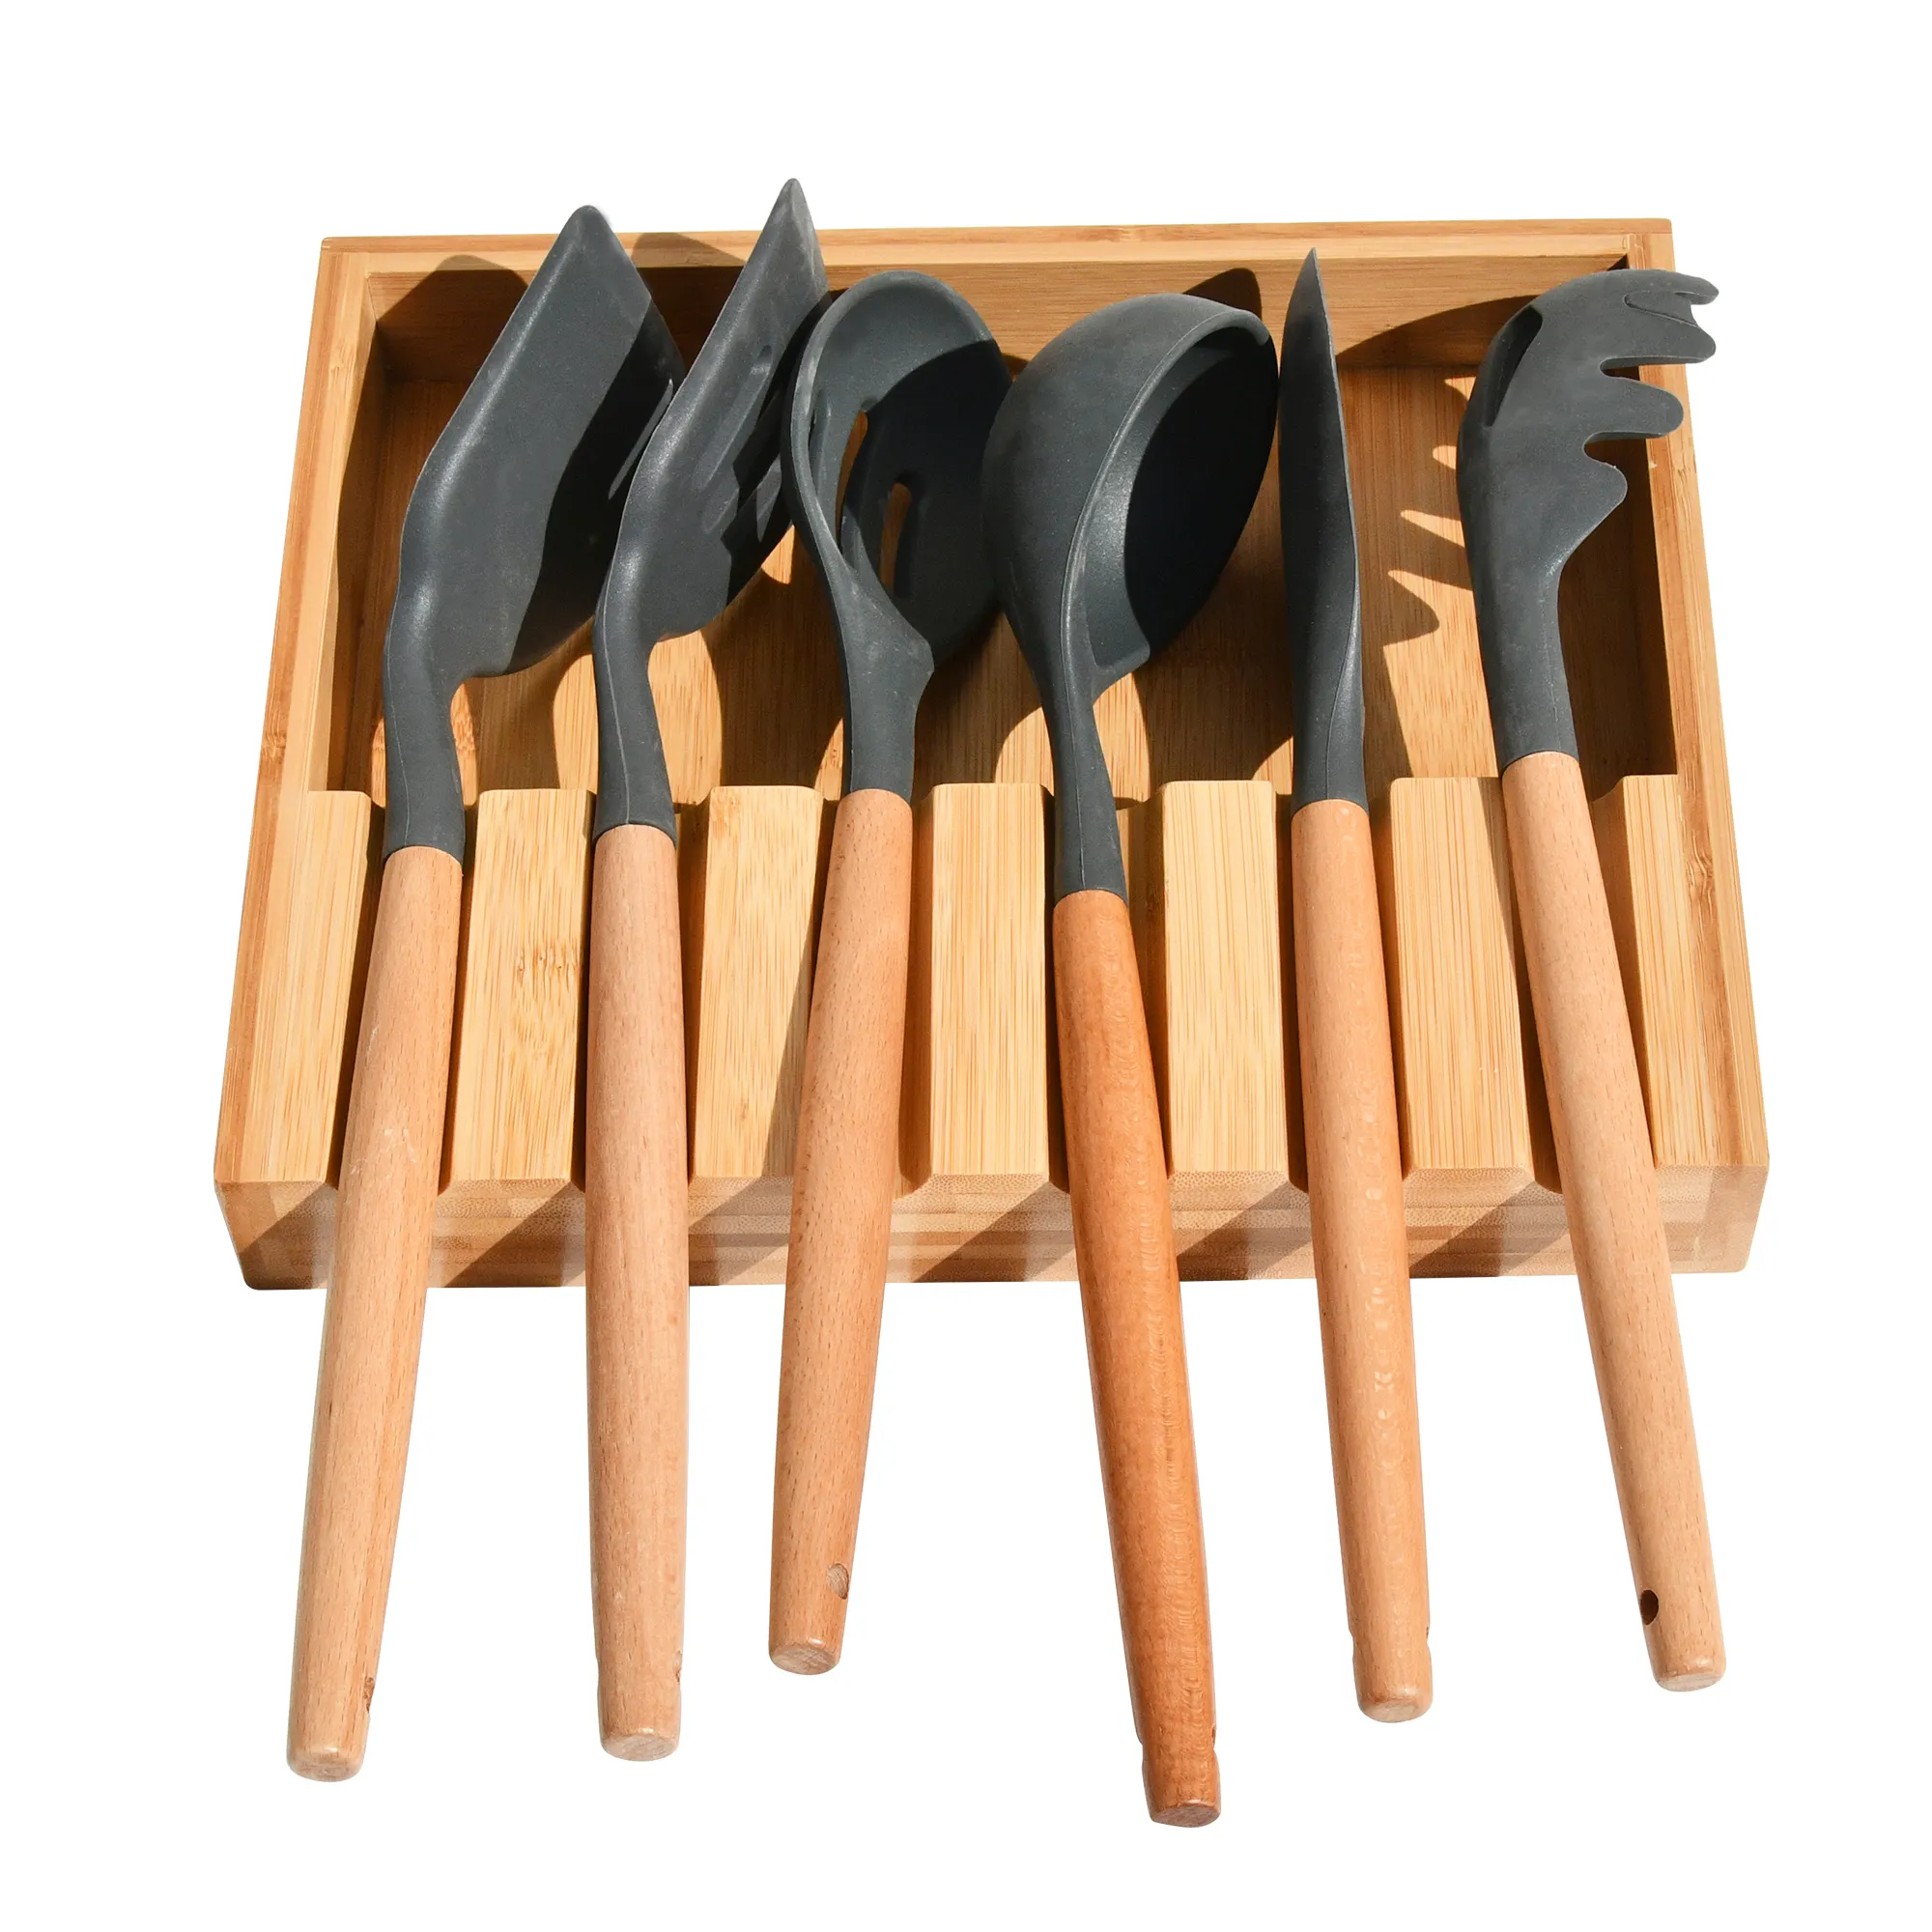 Wholesale Large 6 Slots Bamboo Kitchen Cooking Utensil Organizer Holder Spatula & Spoon Rest for Counter or Stove Top